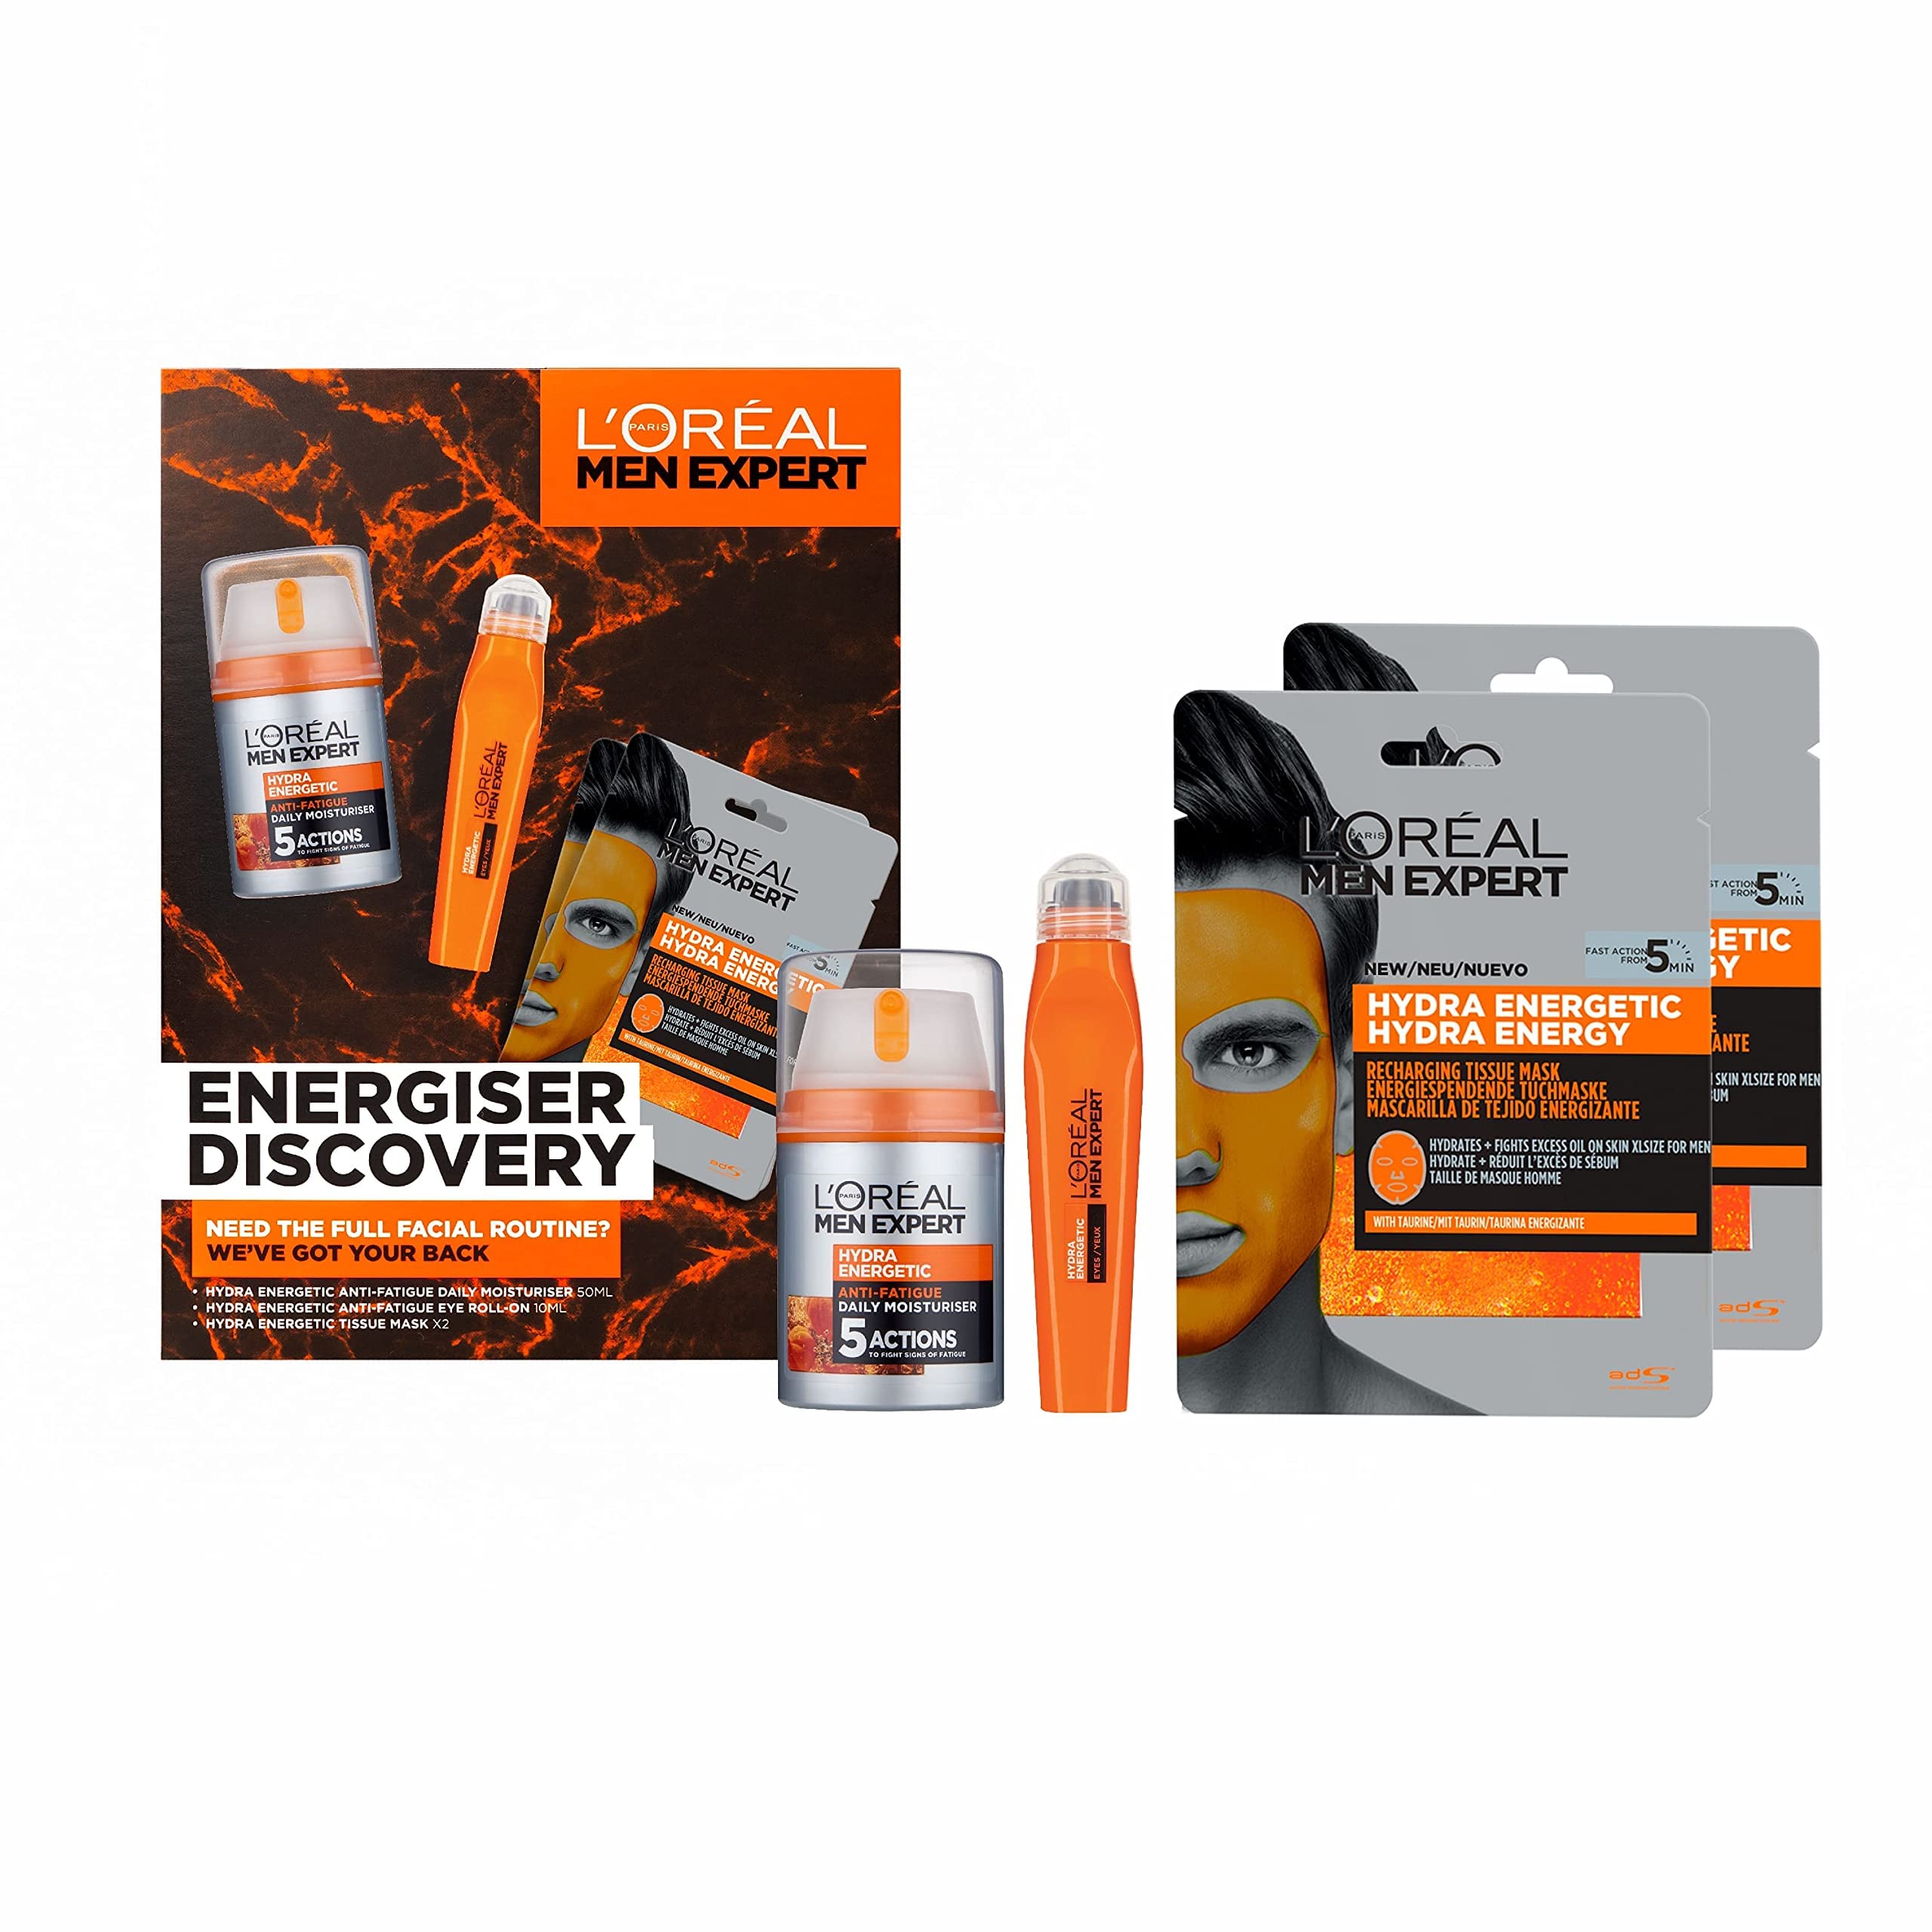 L’Oreal Men Expert Energiser Discovery Gift Set, Men’s Skincare Gift For Him Featuring: Hydra Energetic Vitamin C Anti-Fatigue Moisturiser [50ml], Anti-Fatigue Eye Roll-On [10ml] and Sheet Mask x2